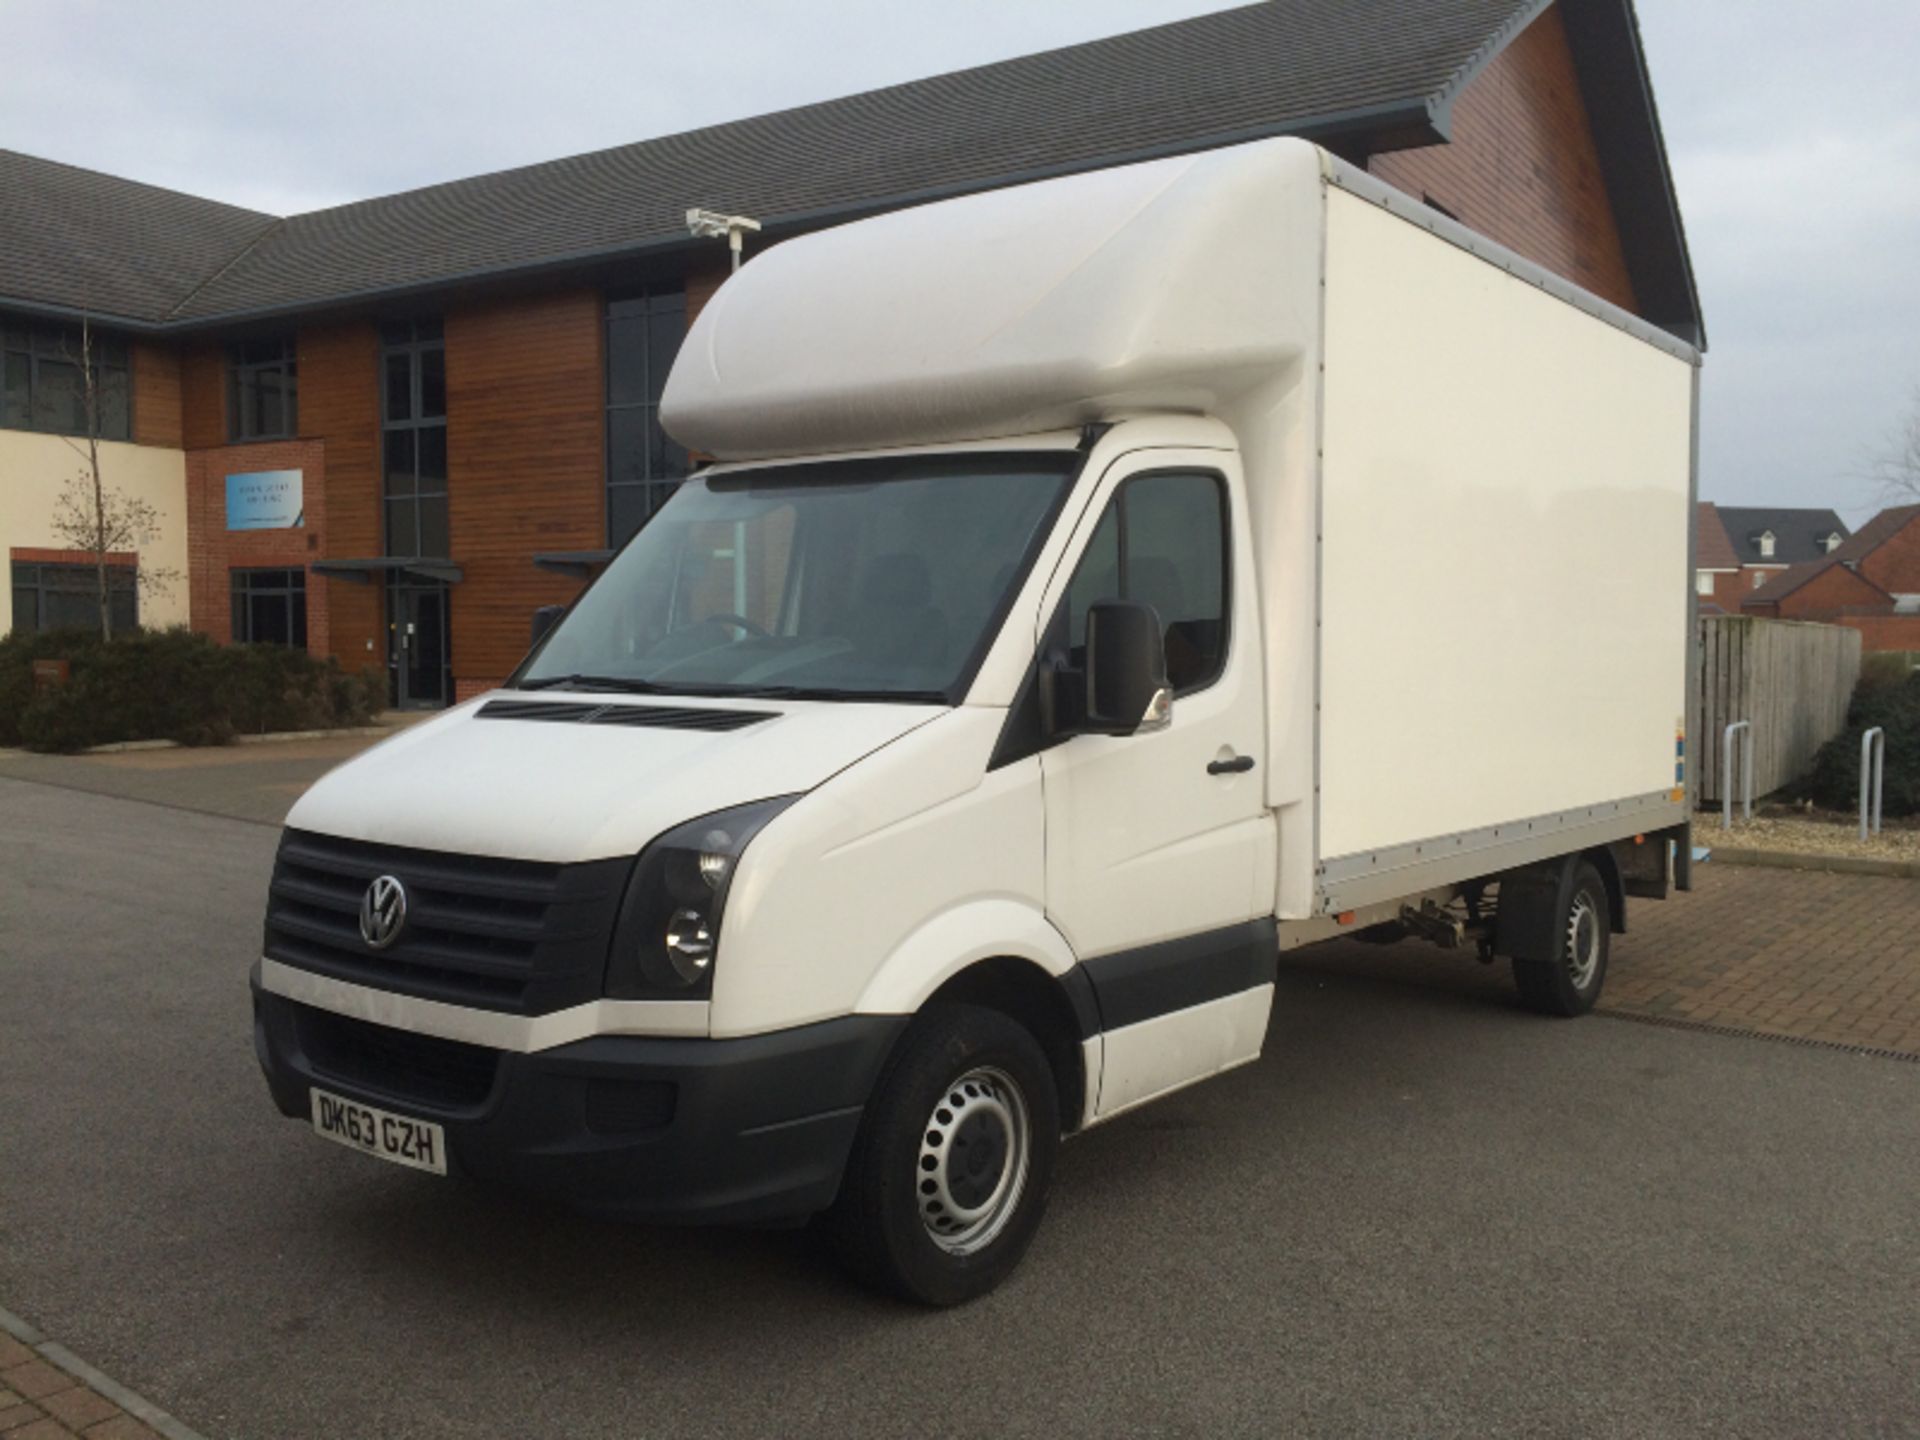 VOLKSWAGEN CRAFTER CR35 2.0TDI "109 BHP" LWB LUTON WITH ELECTRIC TAILIFT "2014 MODEL" LOW MILEAGE